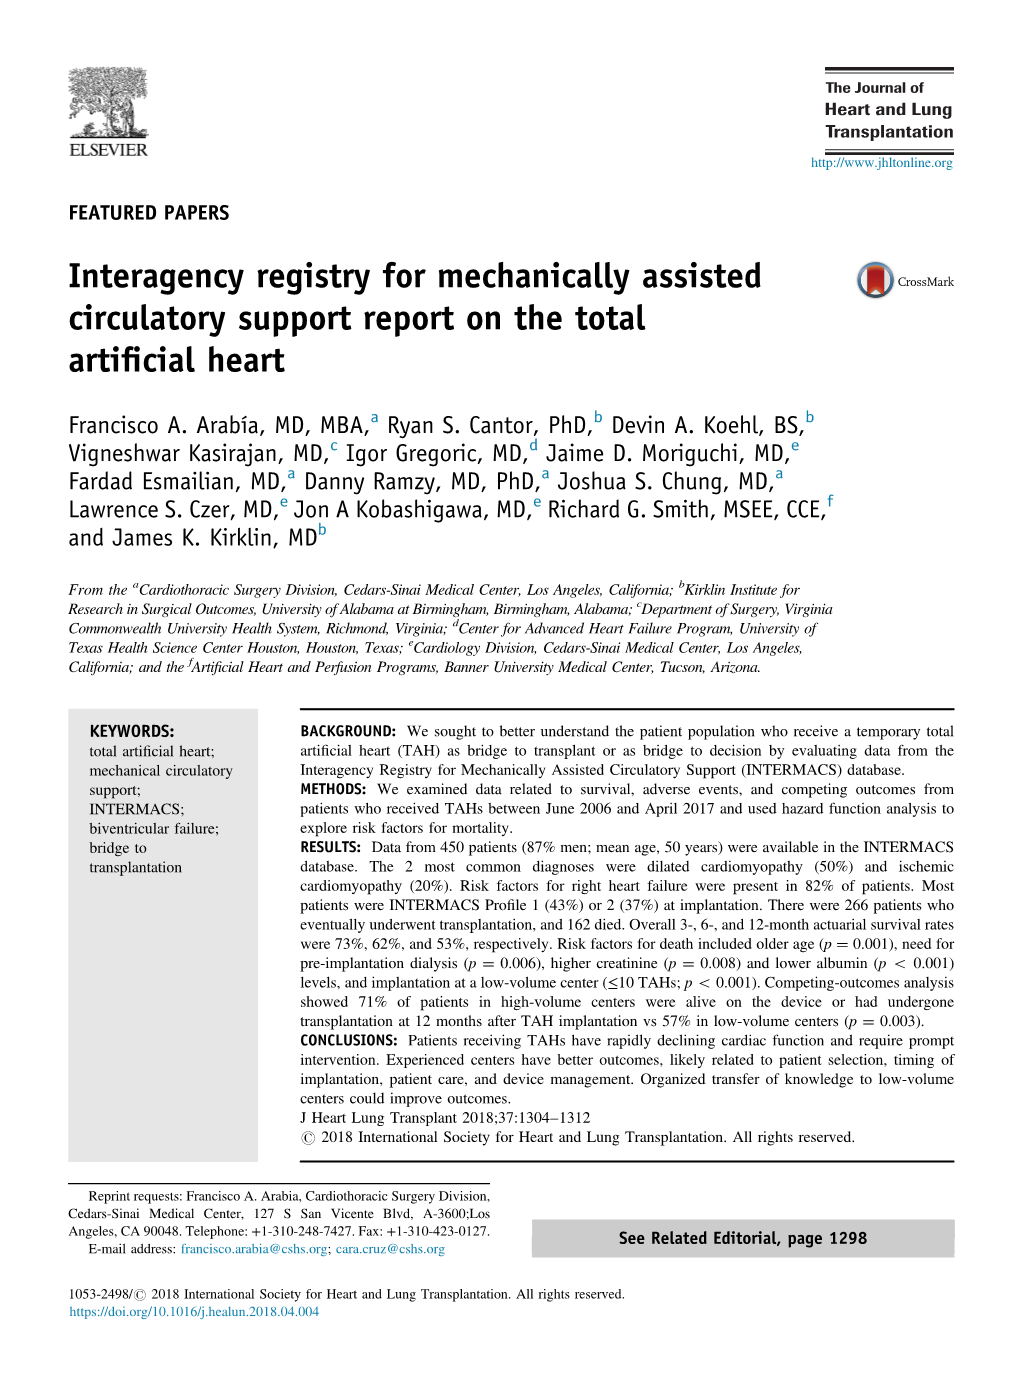 Interagency Registry for Mechanically Assisted Circulatory Support Report on the Total Artiﬁcial Heart